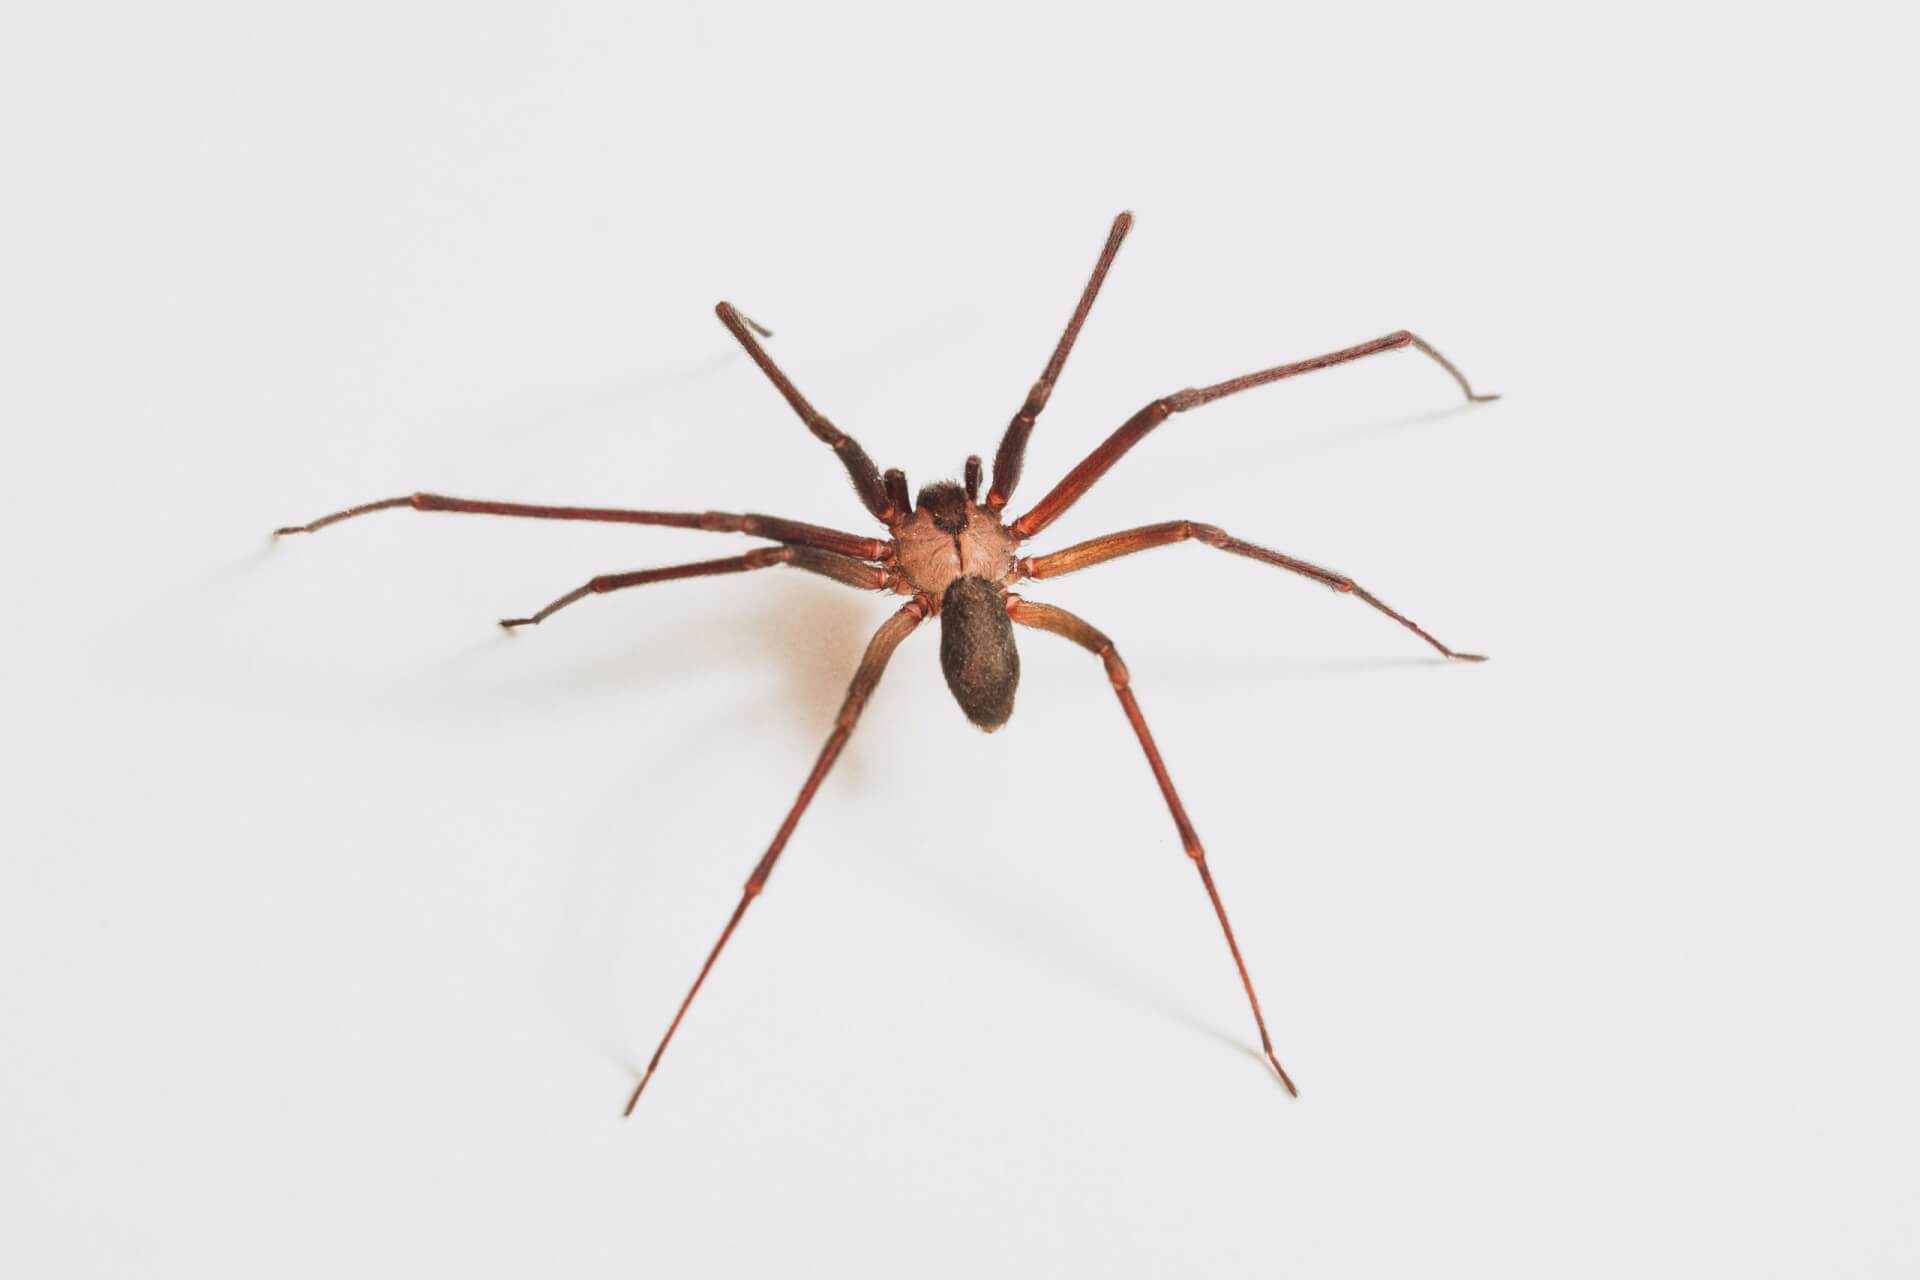 470+ Brown Spider Striped Legs Stock Photos, Pictures & Royalty